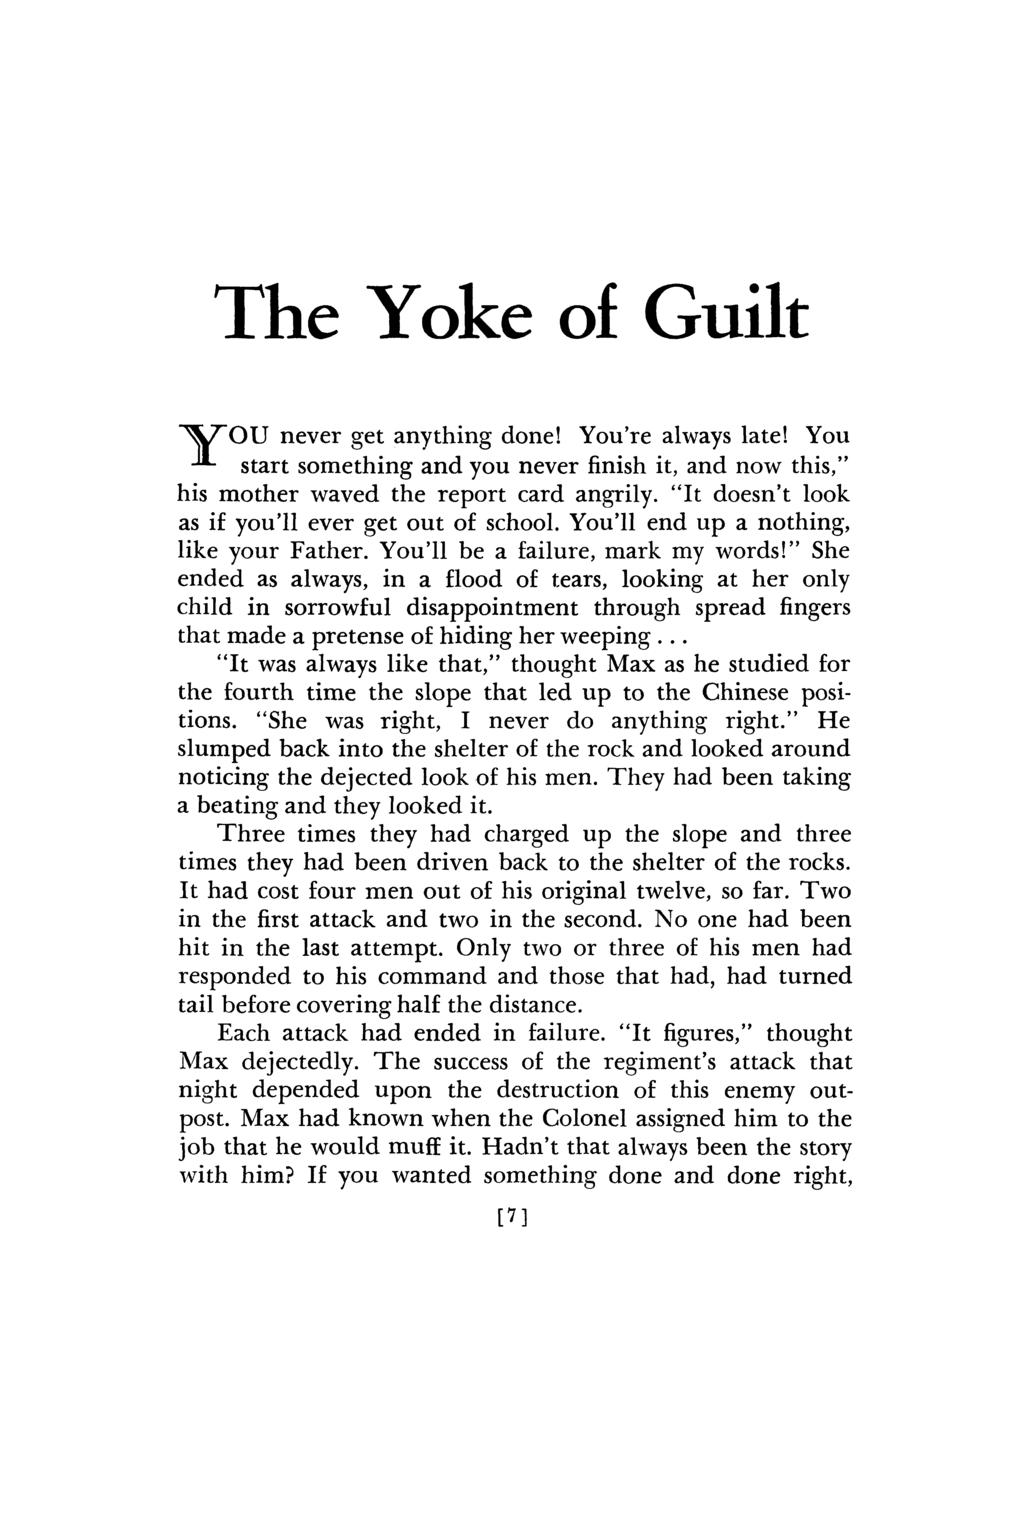 The Yoke of Guilt "^5L7"OU never get anything done! You're always late! You -* start something and you never finish it, and now this," his mother waved the report card angrily.